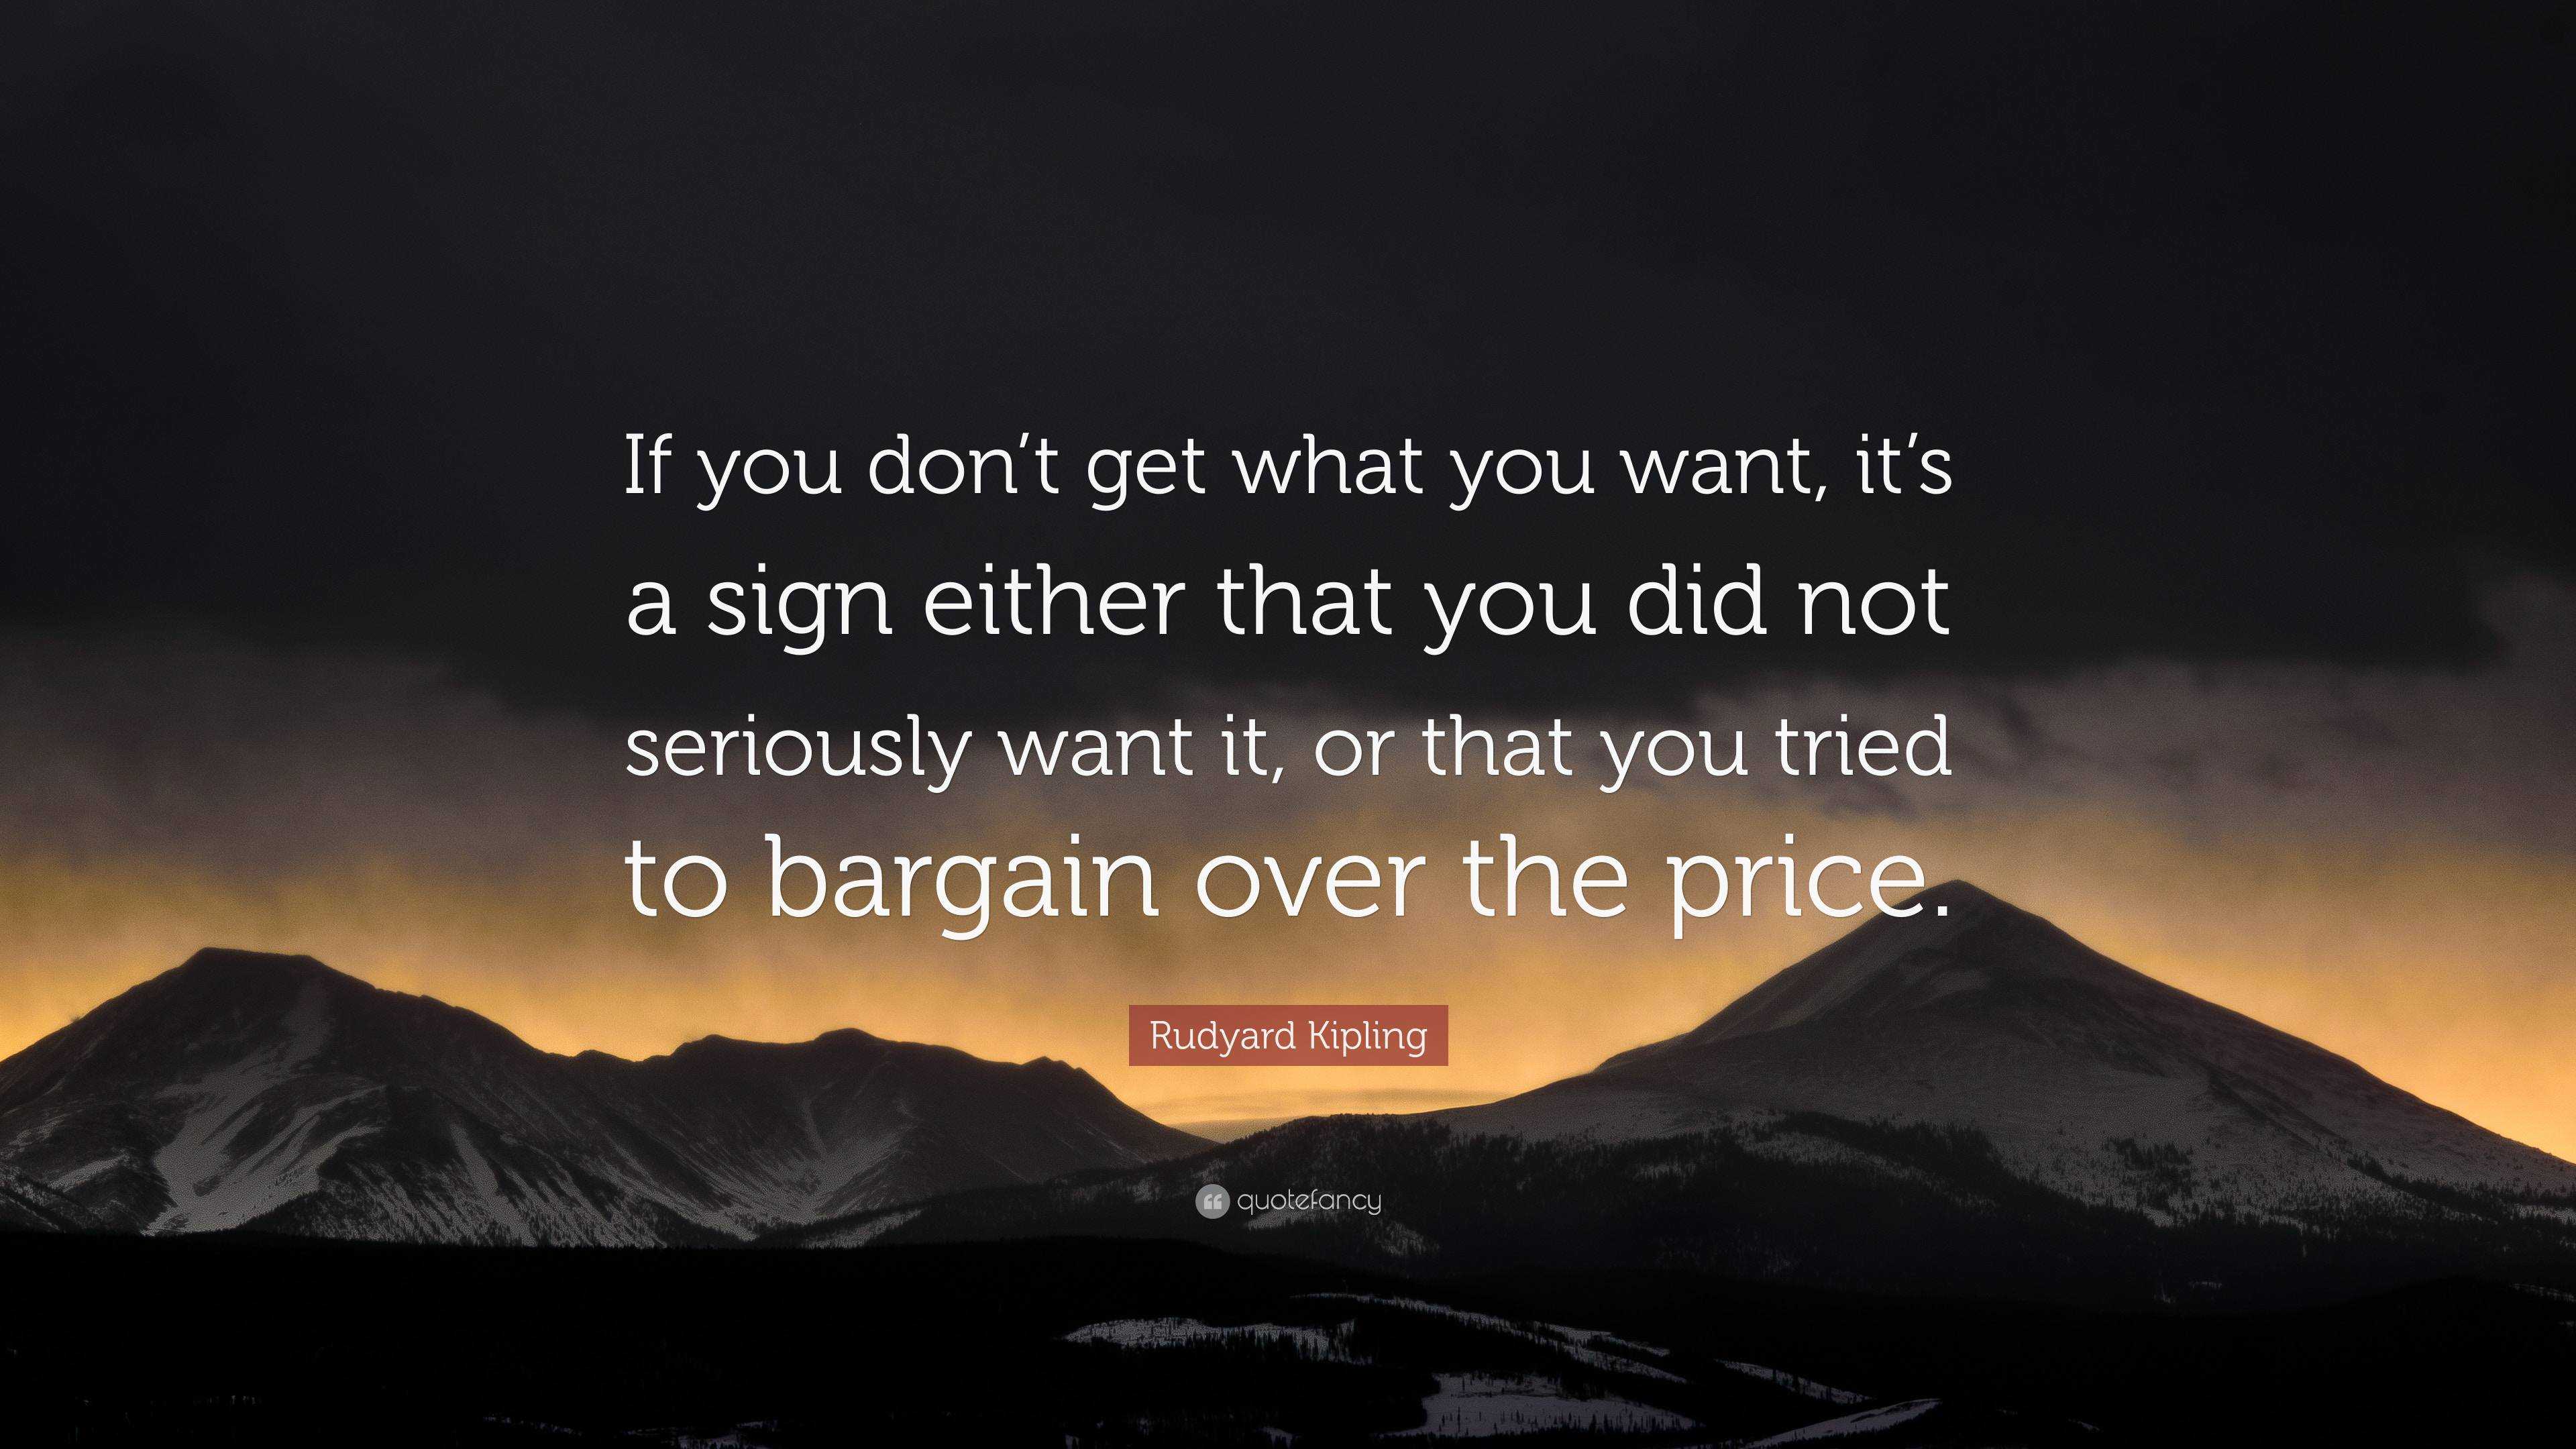 Rudyard Kipling Quote: “If you don't get what you want, it's a sign either  that you did not seriously want it, or that you tried to bargain over...”